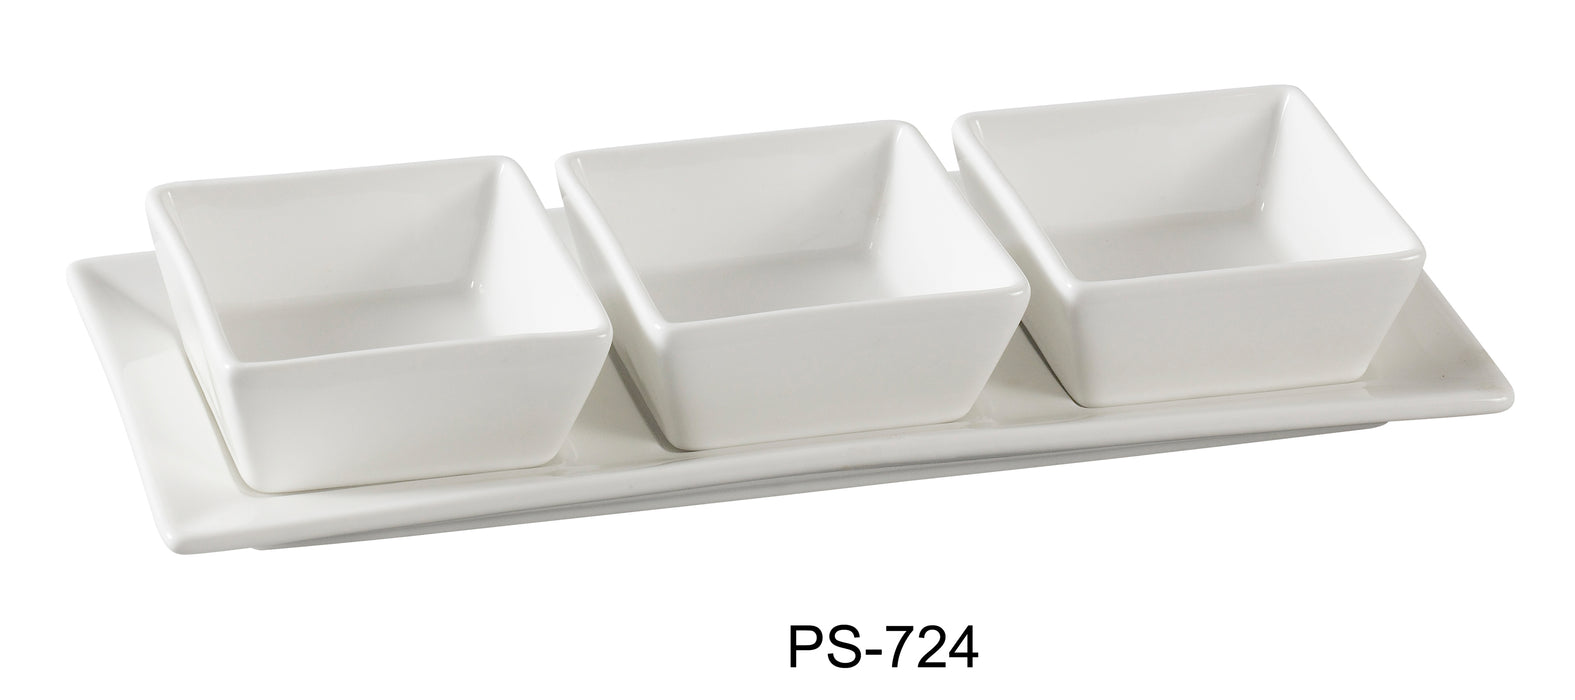 Yanco PS-724 Piscataway Three 3" Square Bowl with 11" x 4 1/4" Tray, 3 Oz Each, China, White, Pack of 12 Set